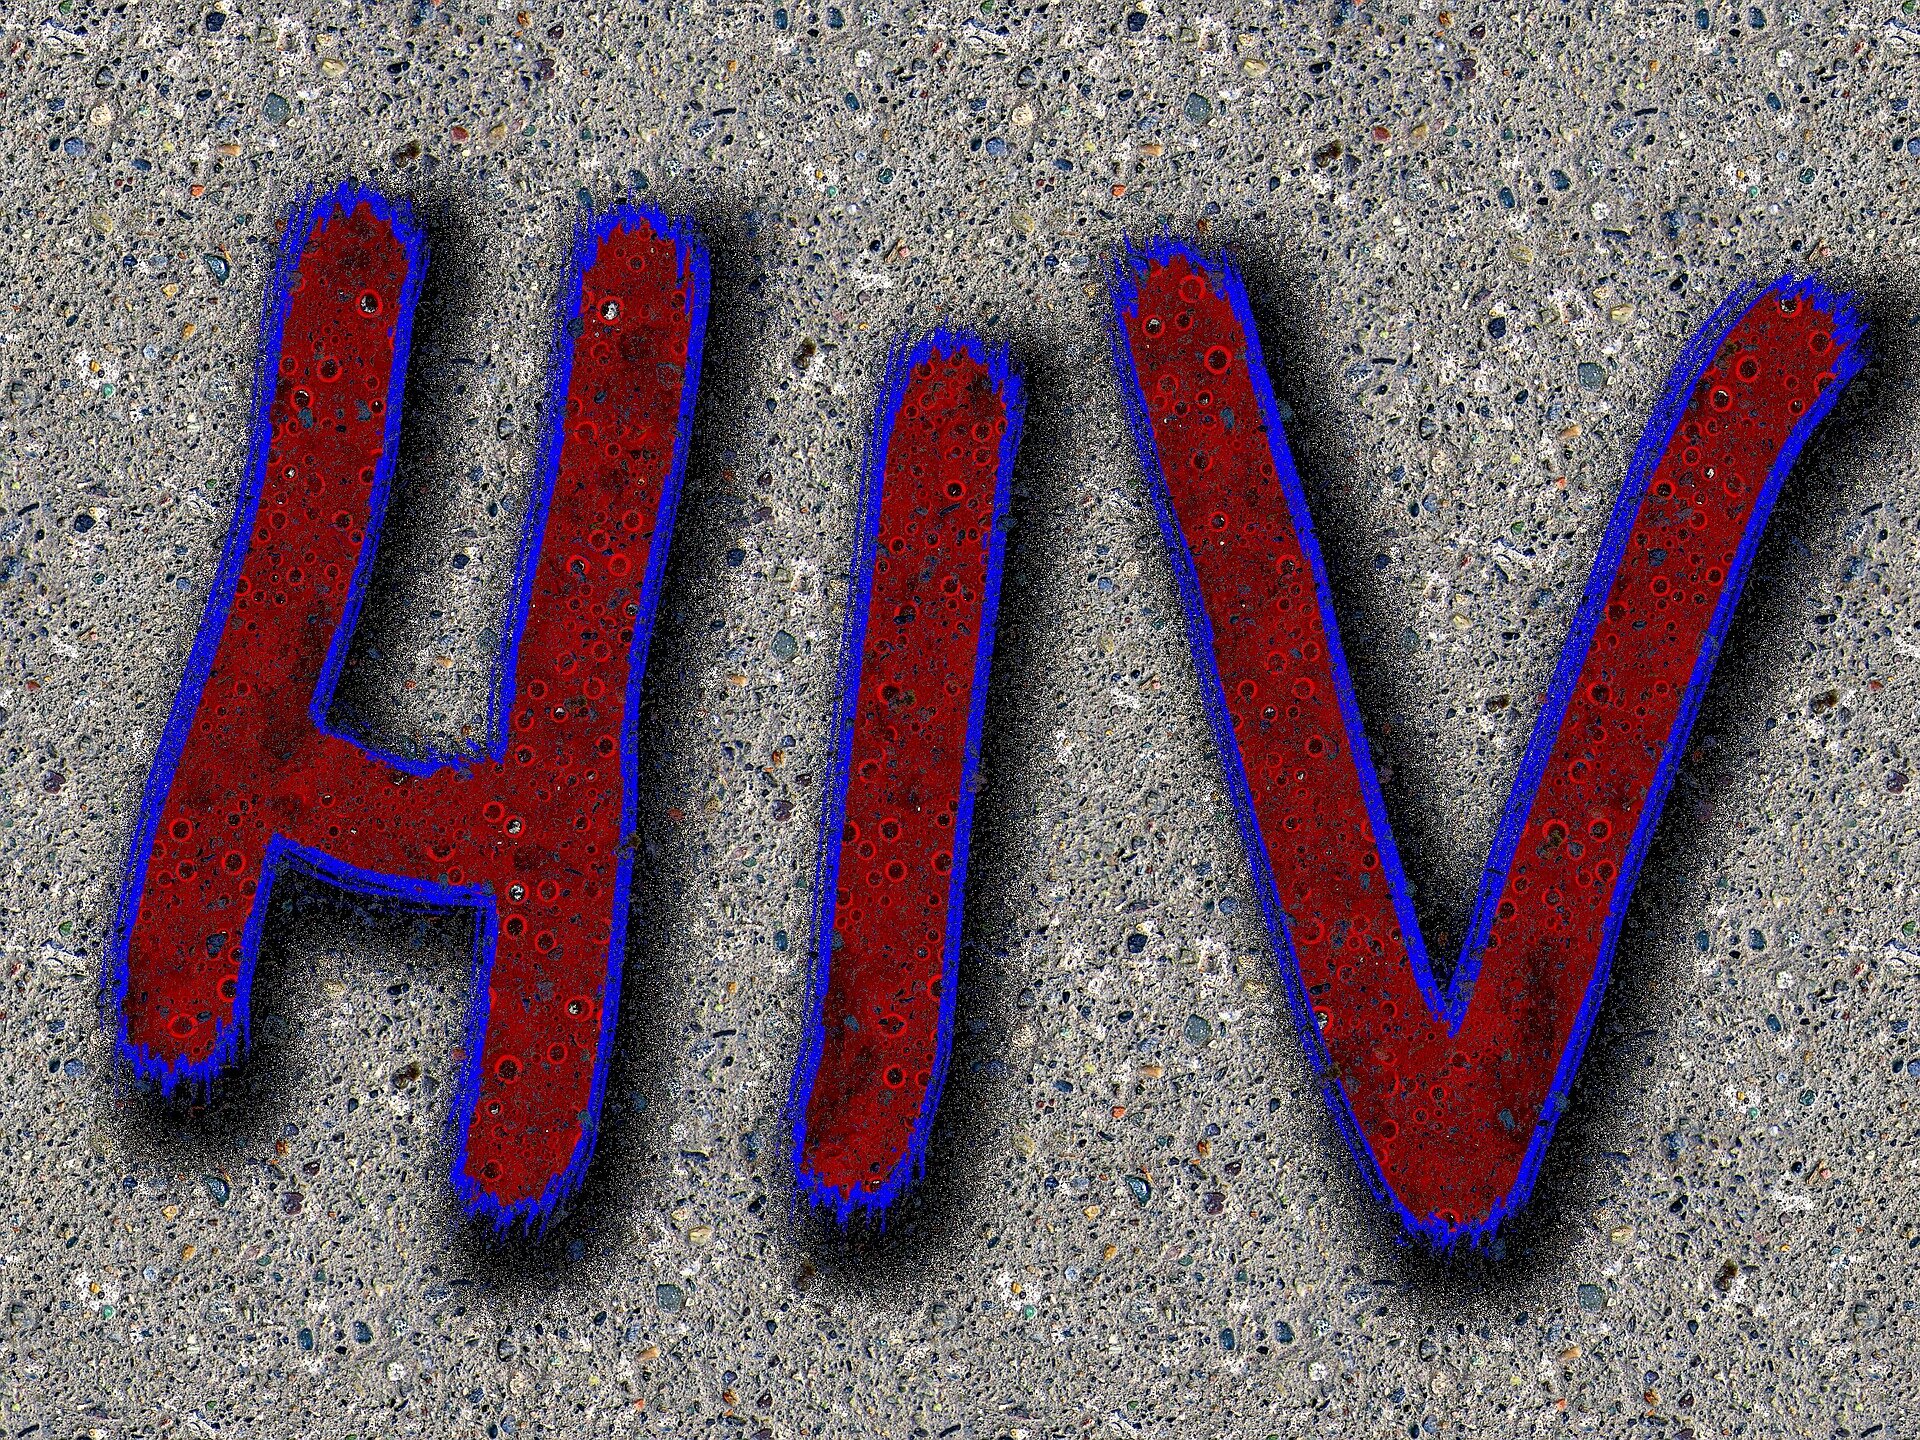 Number of HIV Infections in South Africa Declines Significantly for the First Time